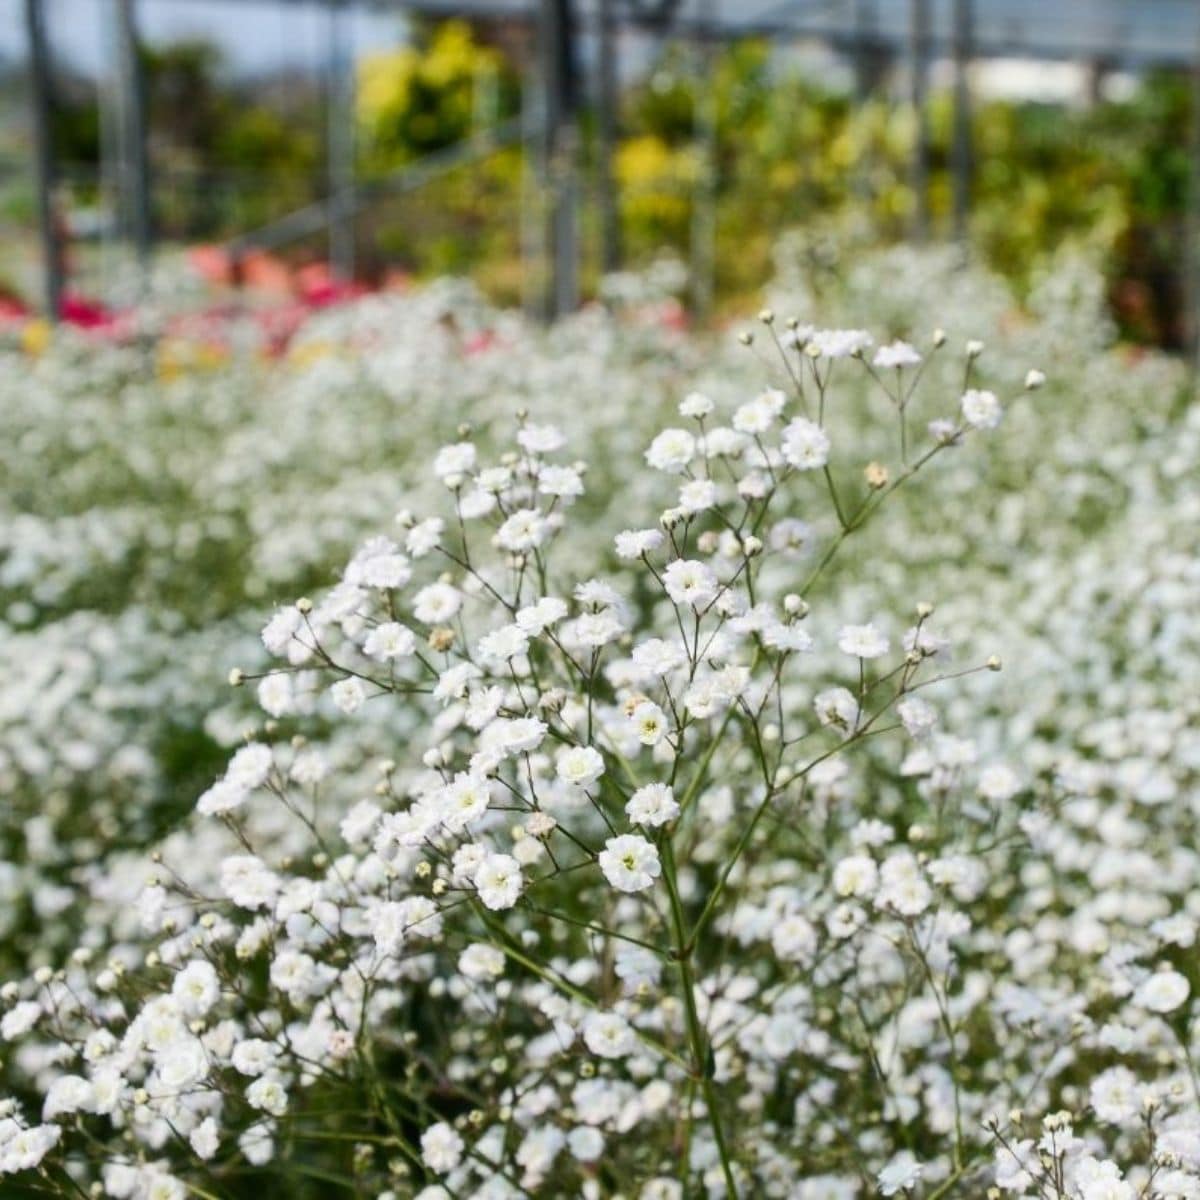 Sow Right Seeds  Grow Annual Baby's Breath from Seed 